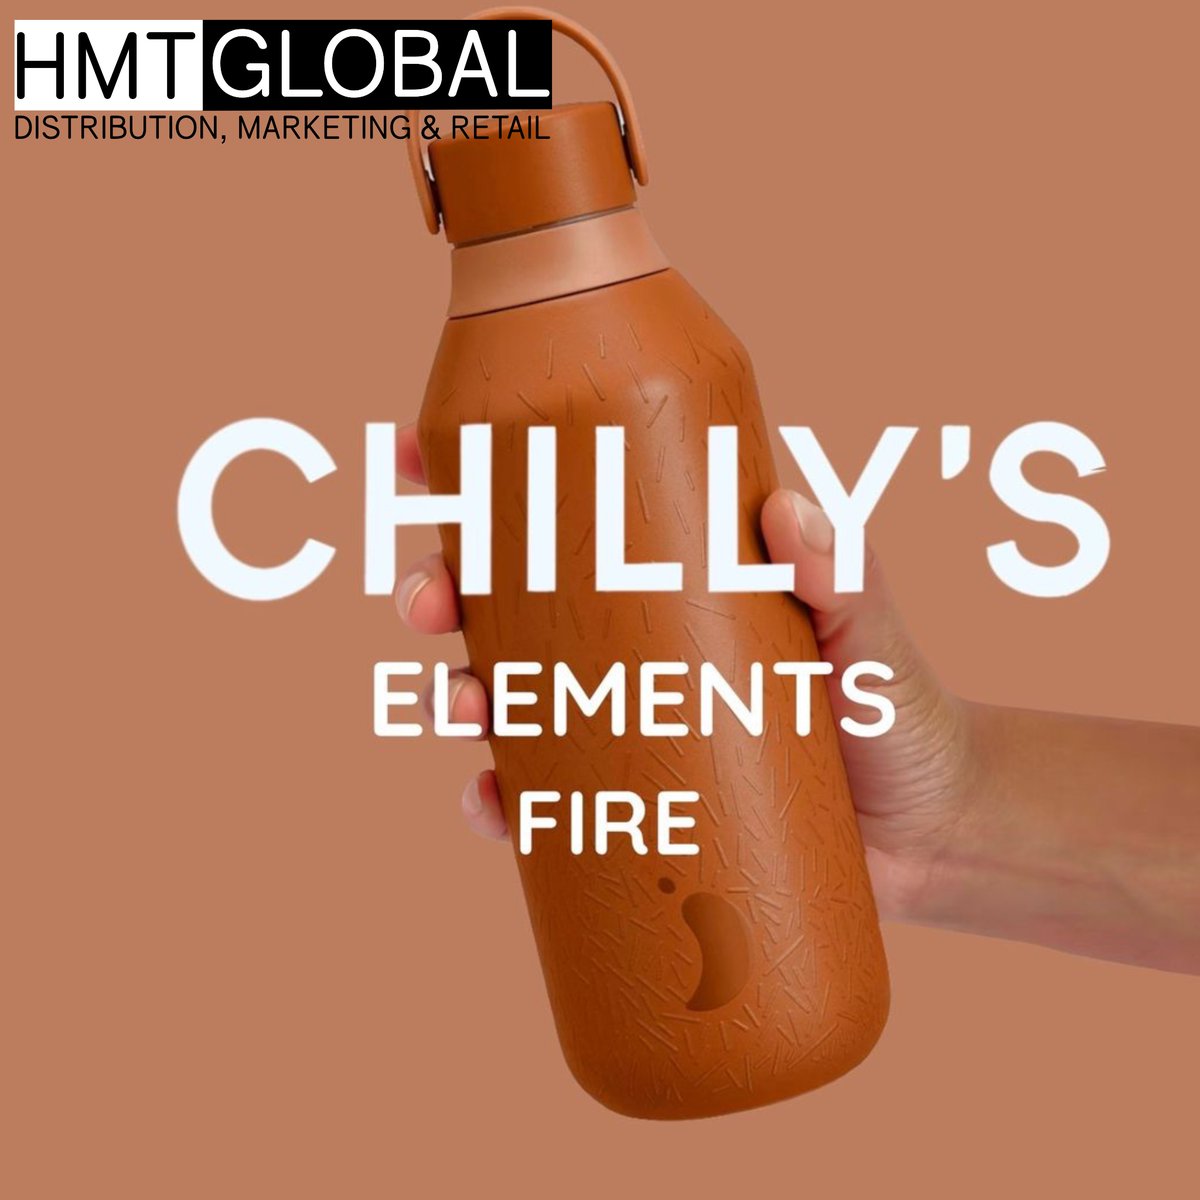 Chillys x Elements Collection: Fire 🔥 🔥 🔥

#Chillys #ChillysInTheDesert #Bottle #Bottles #ForonTheGo #Water #Love #Hydration #HydrationIsKey #Reuse #Sustainable #SustainableLiving #Sustainability #SustainabilityMatters #ReduceReuseRecycle